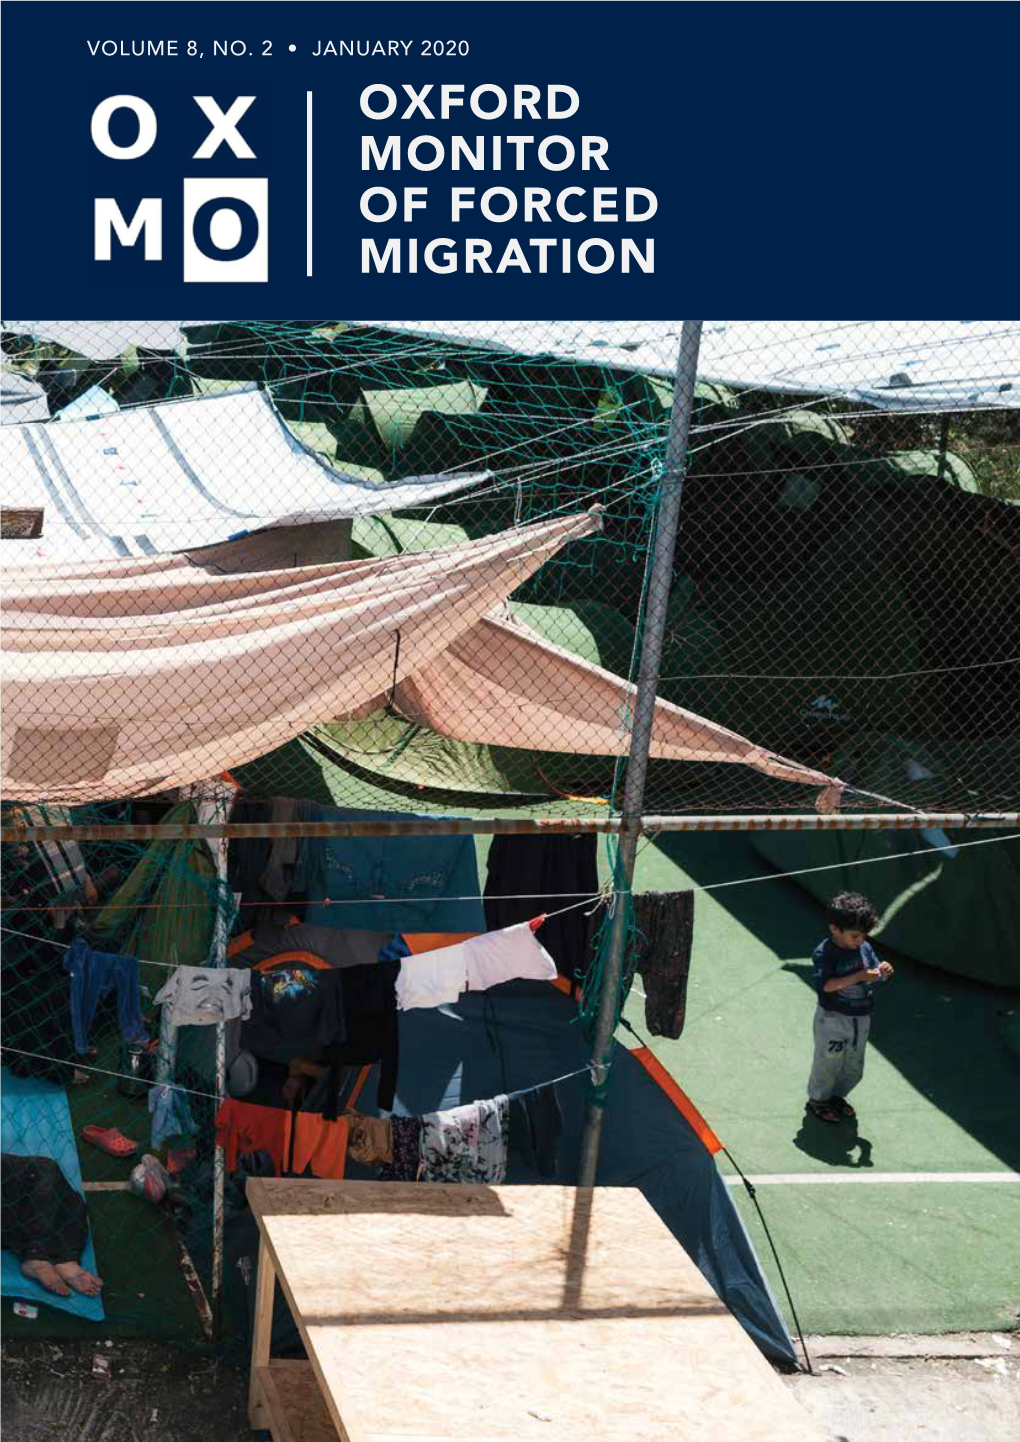 Oxford Monitor of Forced Migration